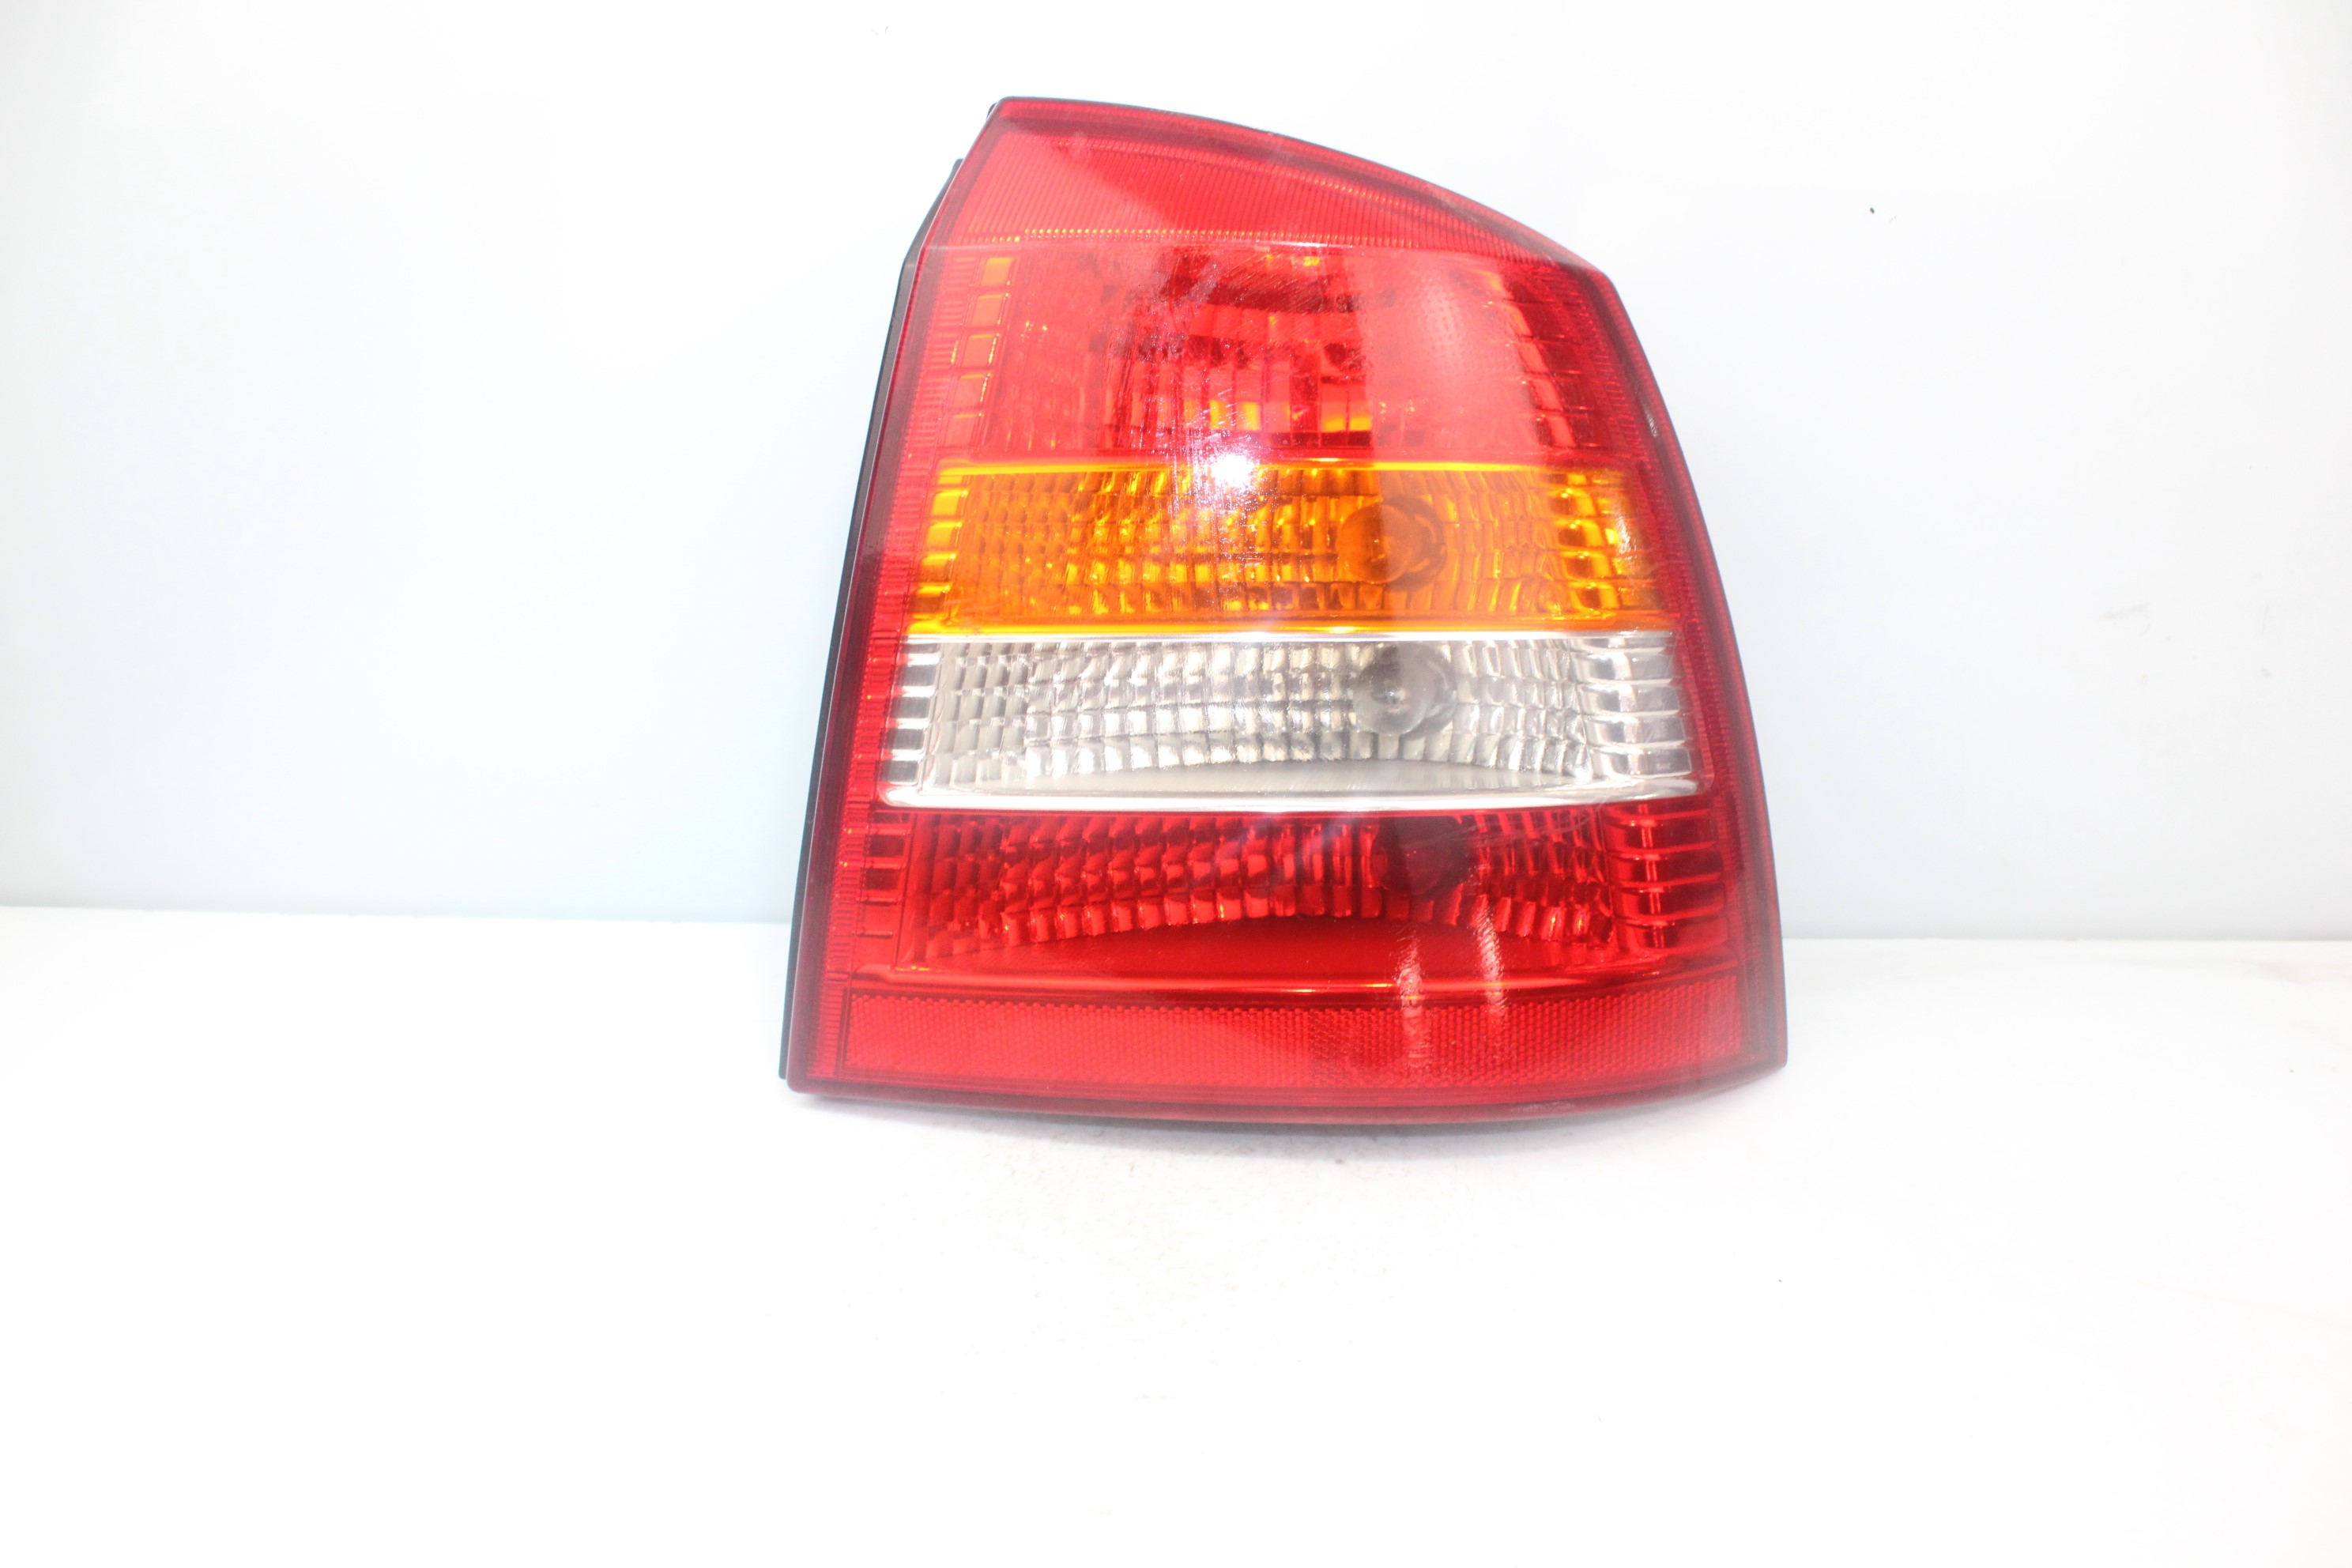 OPEL Astra H (2004-2014) Rear Right Taillight Lamp 13110931 23789682